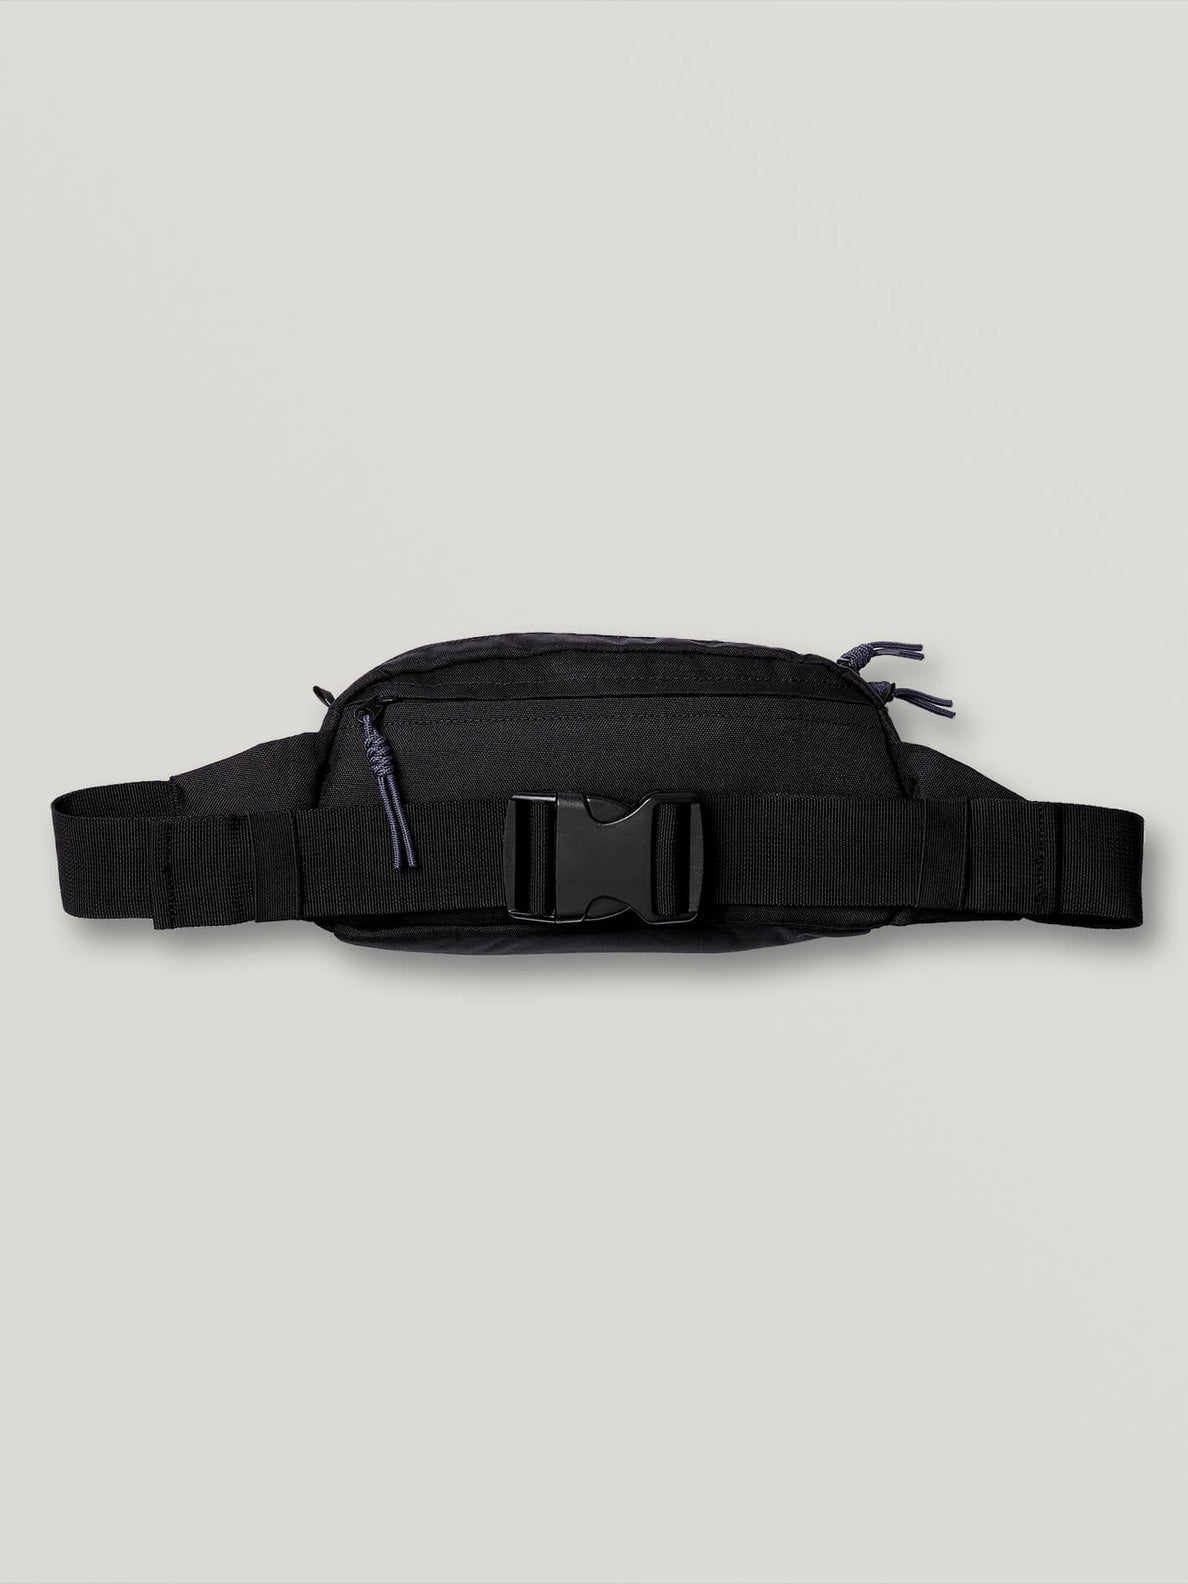 Waist Pack Realistic Looking Large Capacity Oxford Cloth 3D